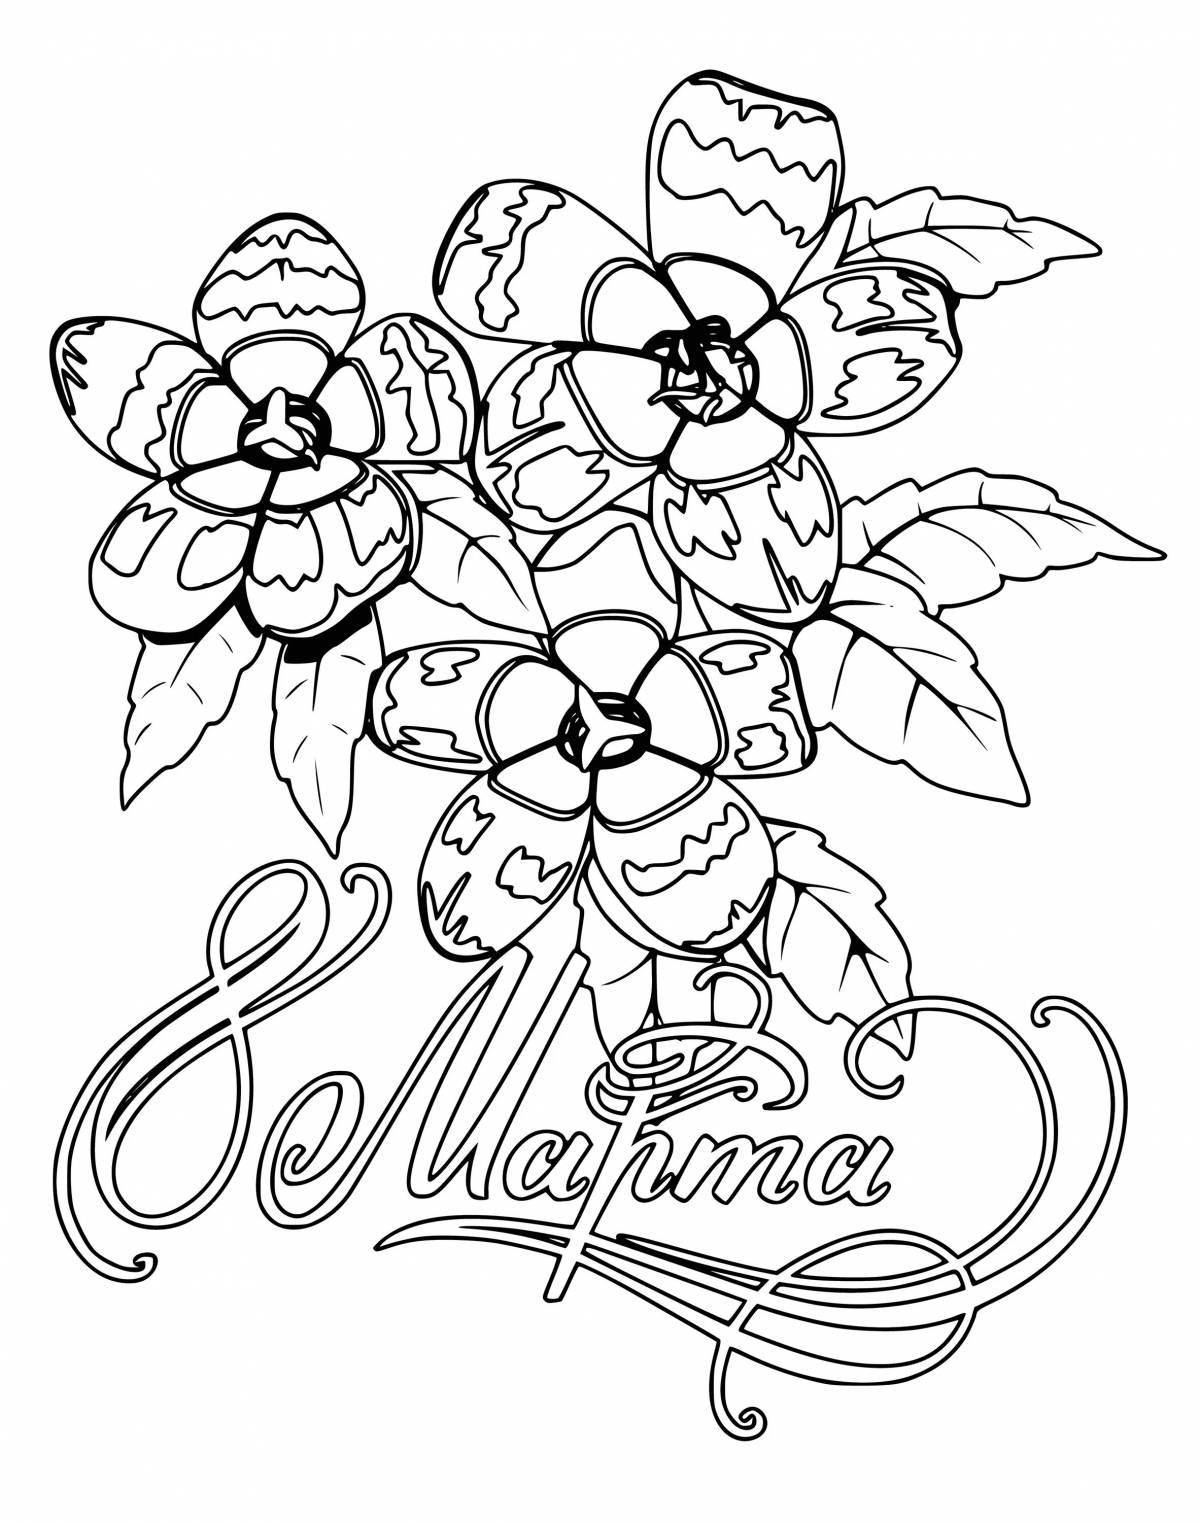 Coloring page dazzling mom March 8